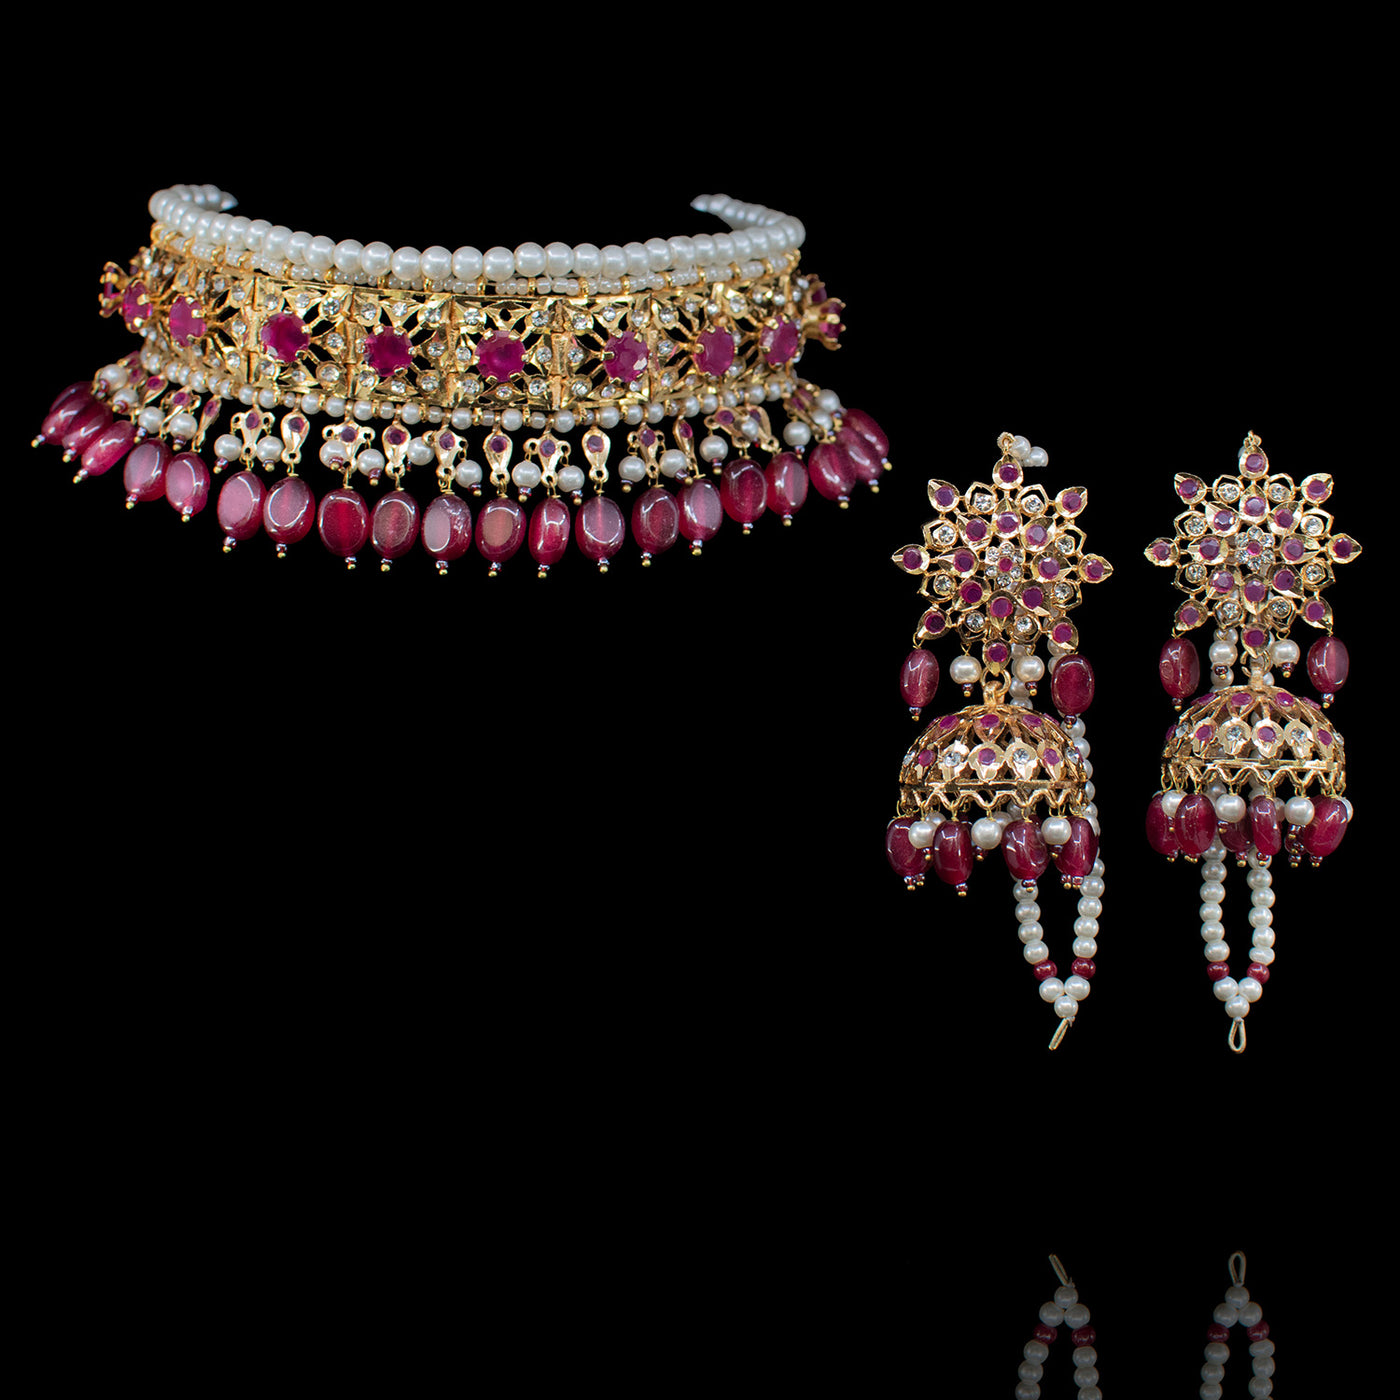 Nirma Set - Available in 2 Colors